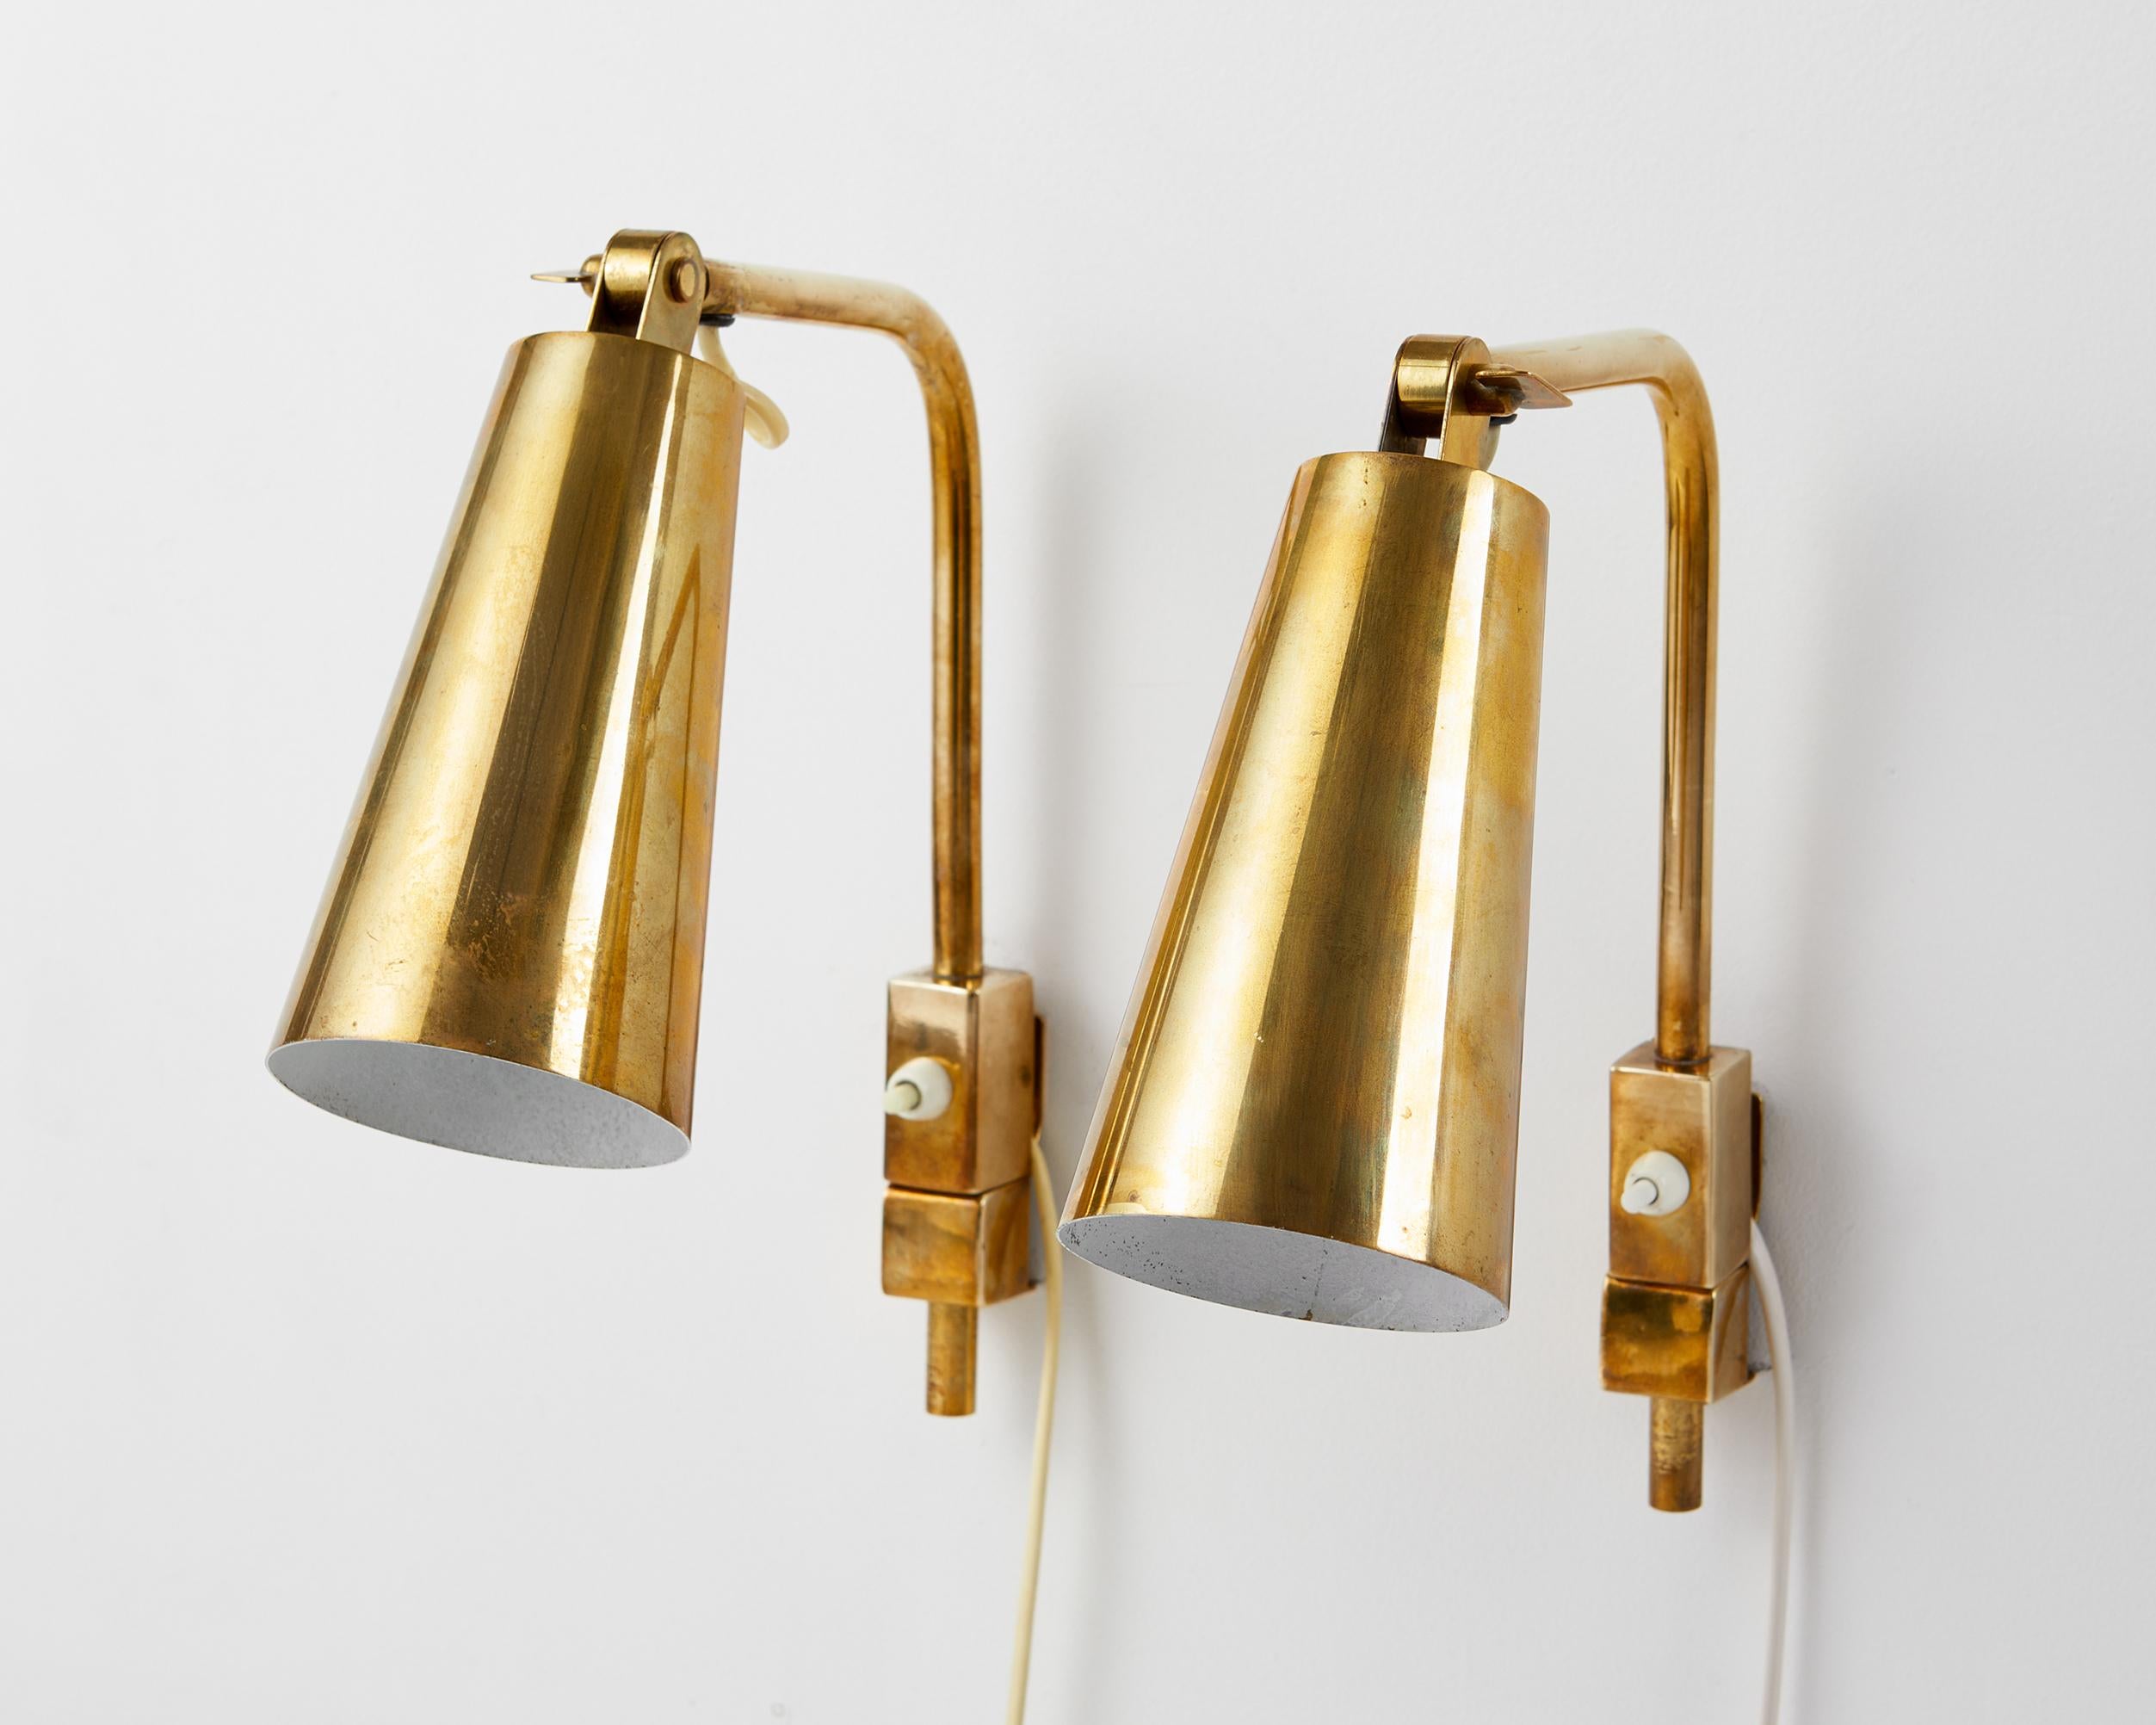 Pair of wall lamps model ‘9459’ designed by Paavo Tynell for Oy Taito,
Finland, 1960's.
Brass.

Engraved ‘OY TAITO AB’

The combination of cylindrical lampshades and square-shaped switch housings makes this elegant pair of Nordic wall lights